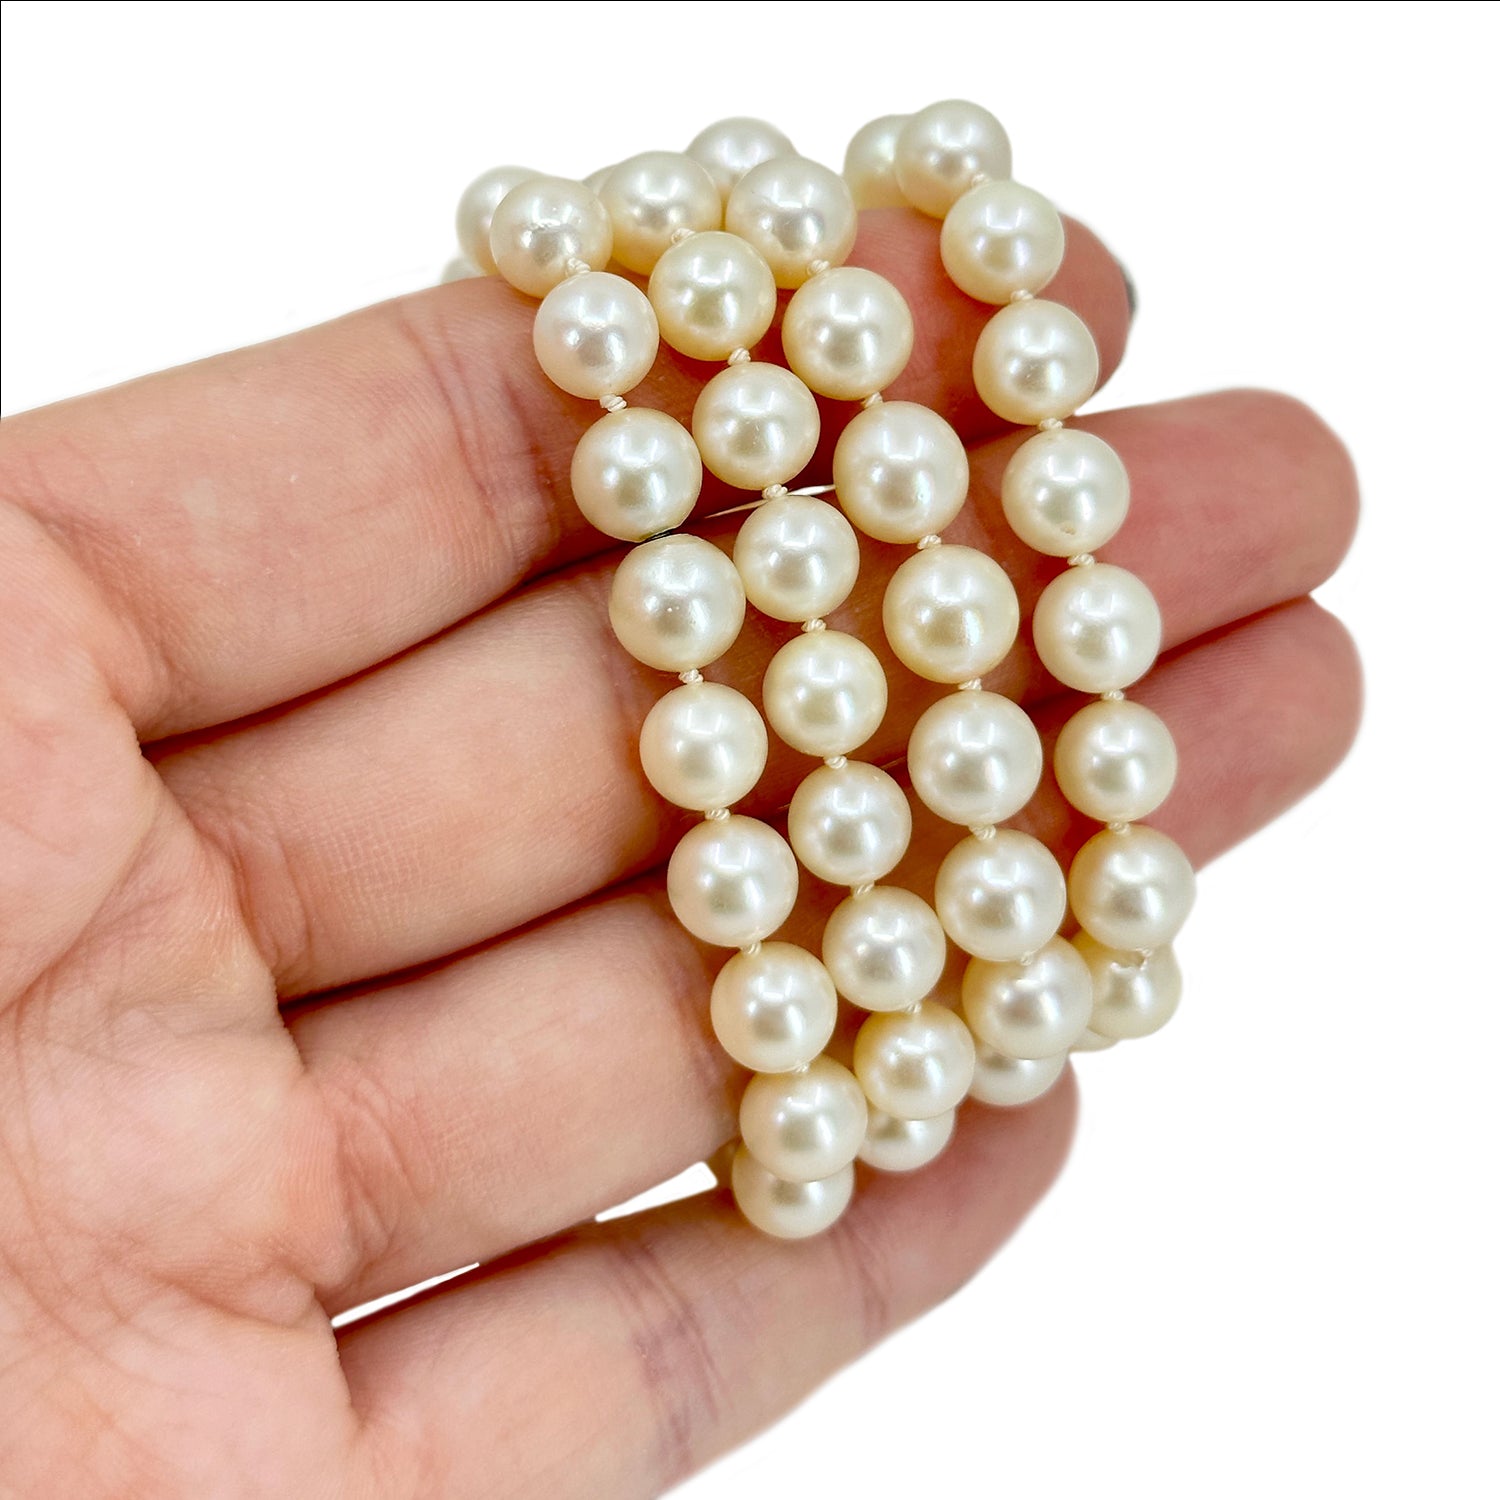 Hidden Clasp Japanese Saltwater Cultured Akoya Pearl Vintage Necklace Strand - 24 Inch